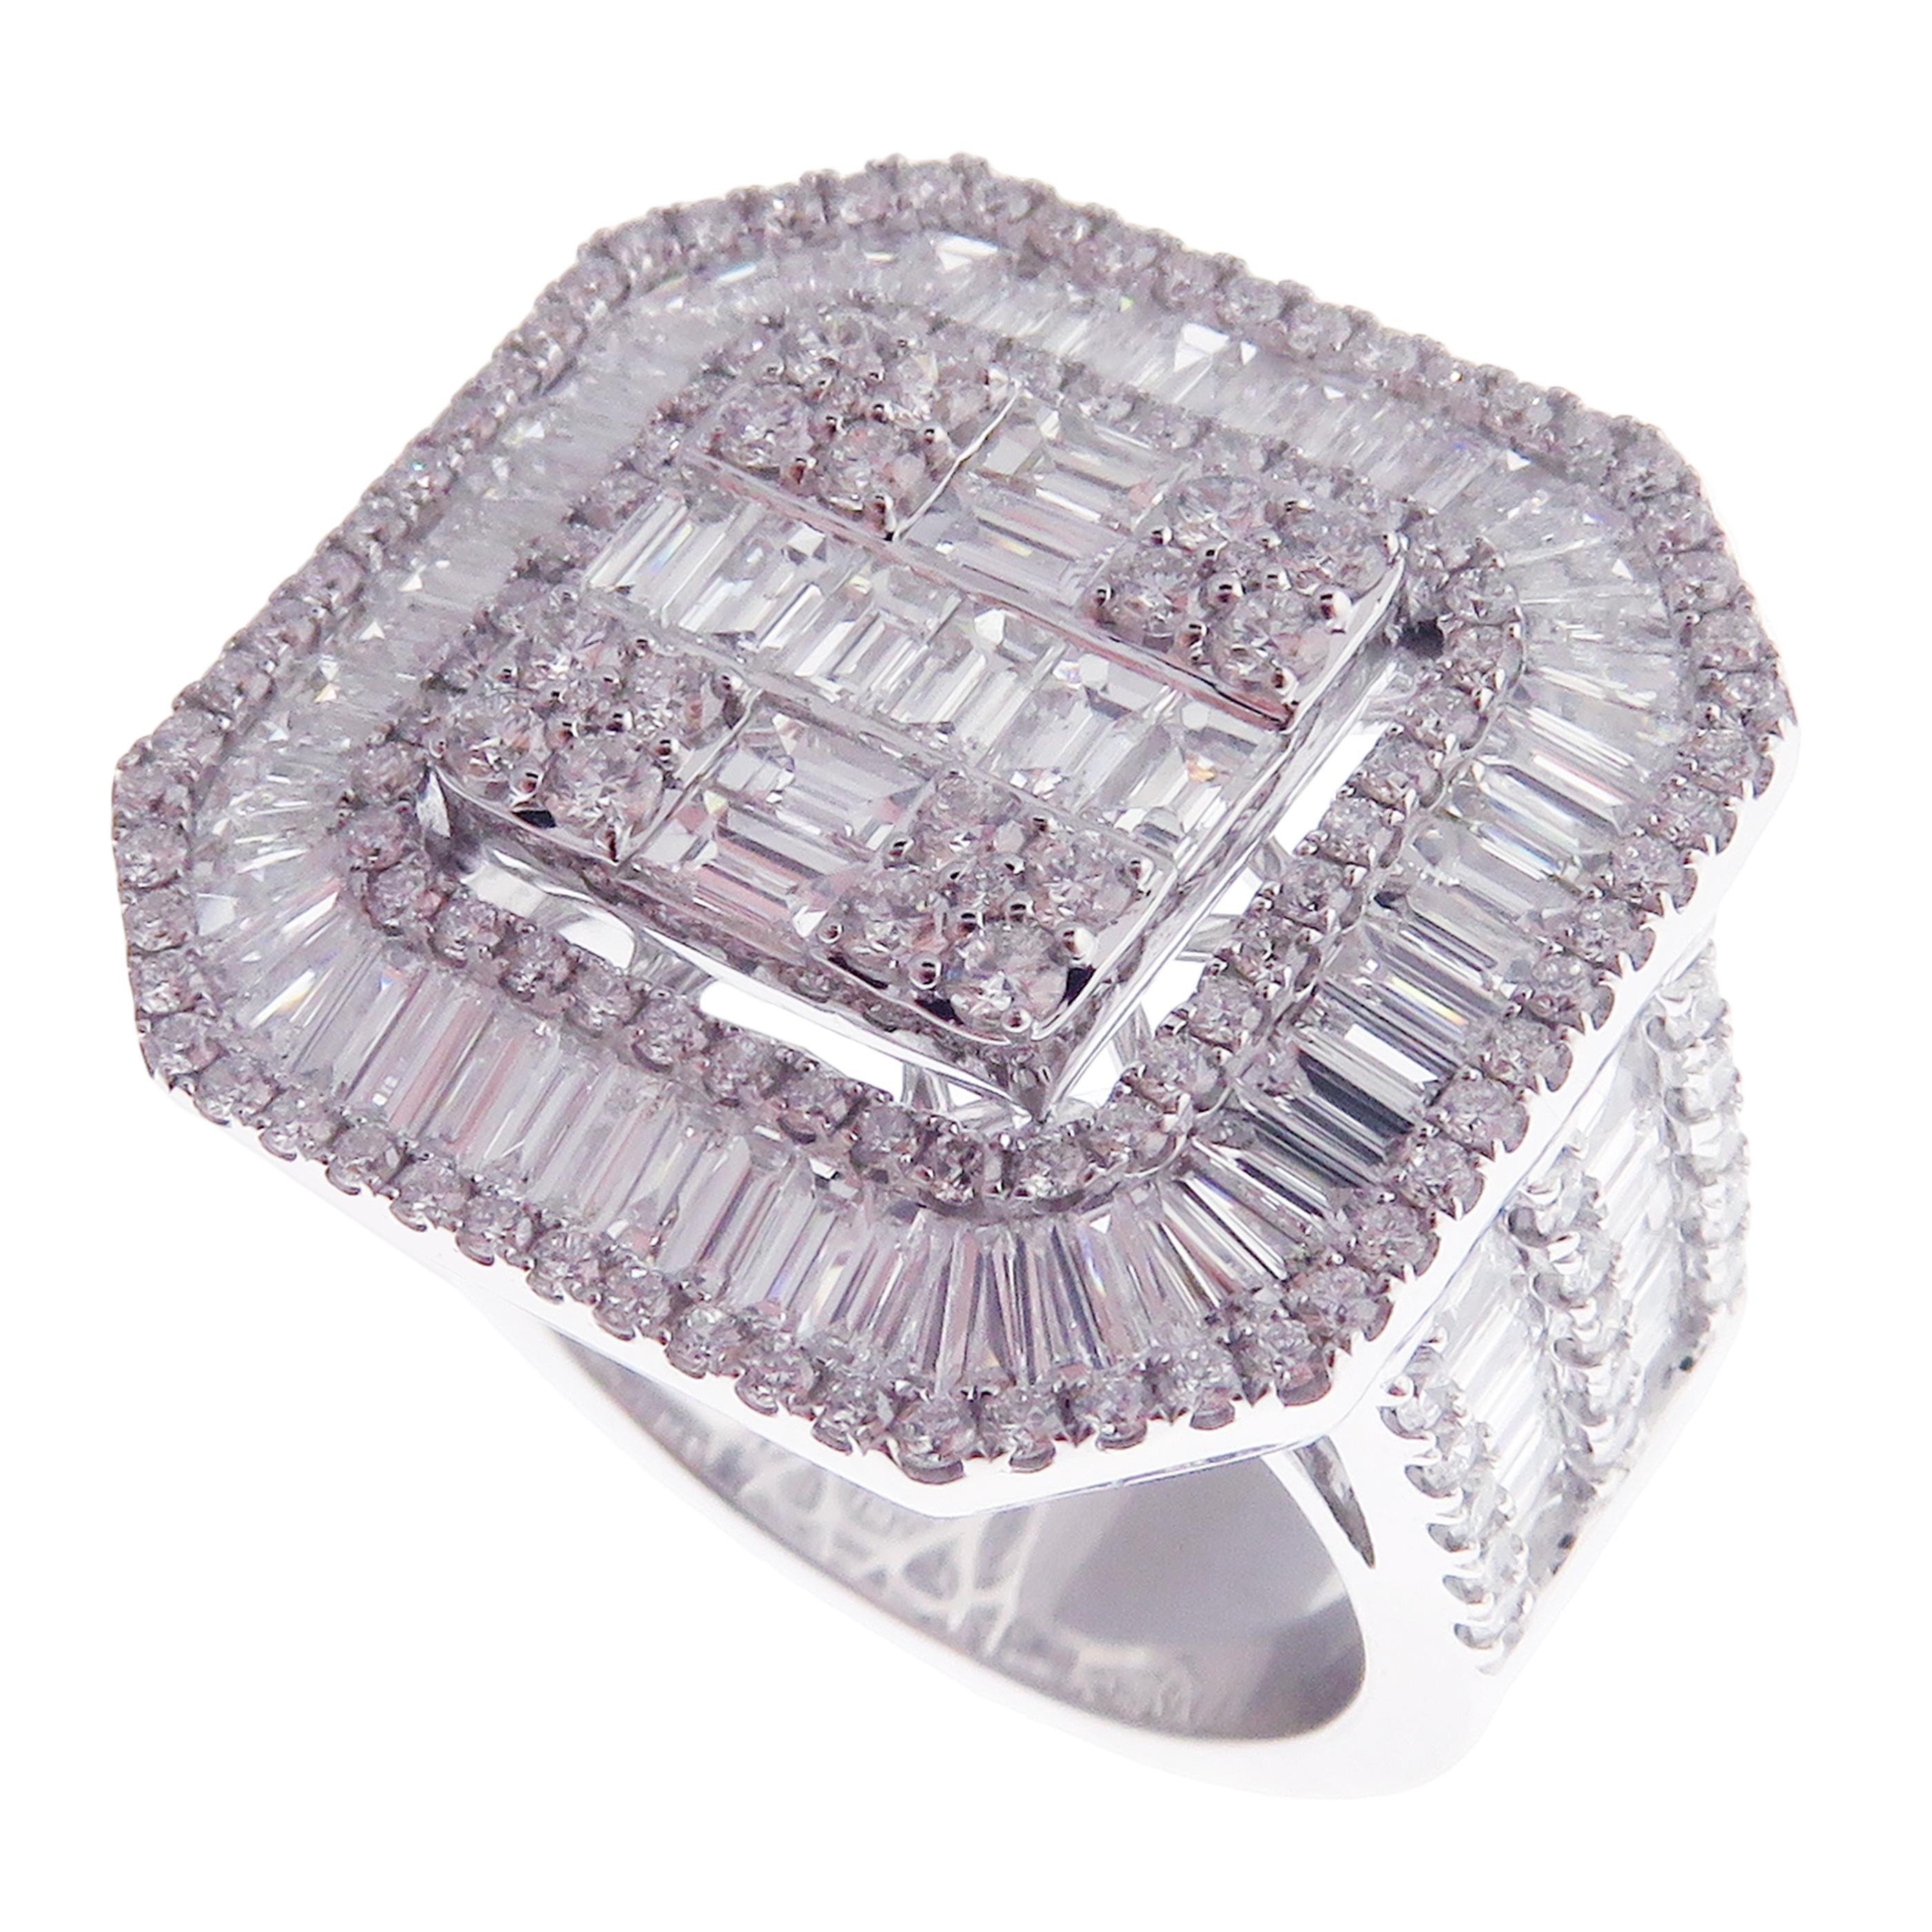 This baguette, diamond ring is crafted in 18-karat white gold, weighing approximately 3.10 total carats of SI-V Quality white diamonds. This ring is comfortable and can be sized 